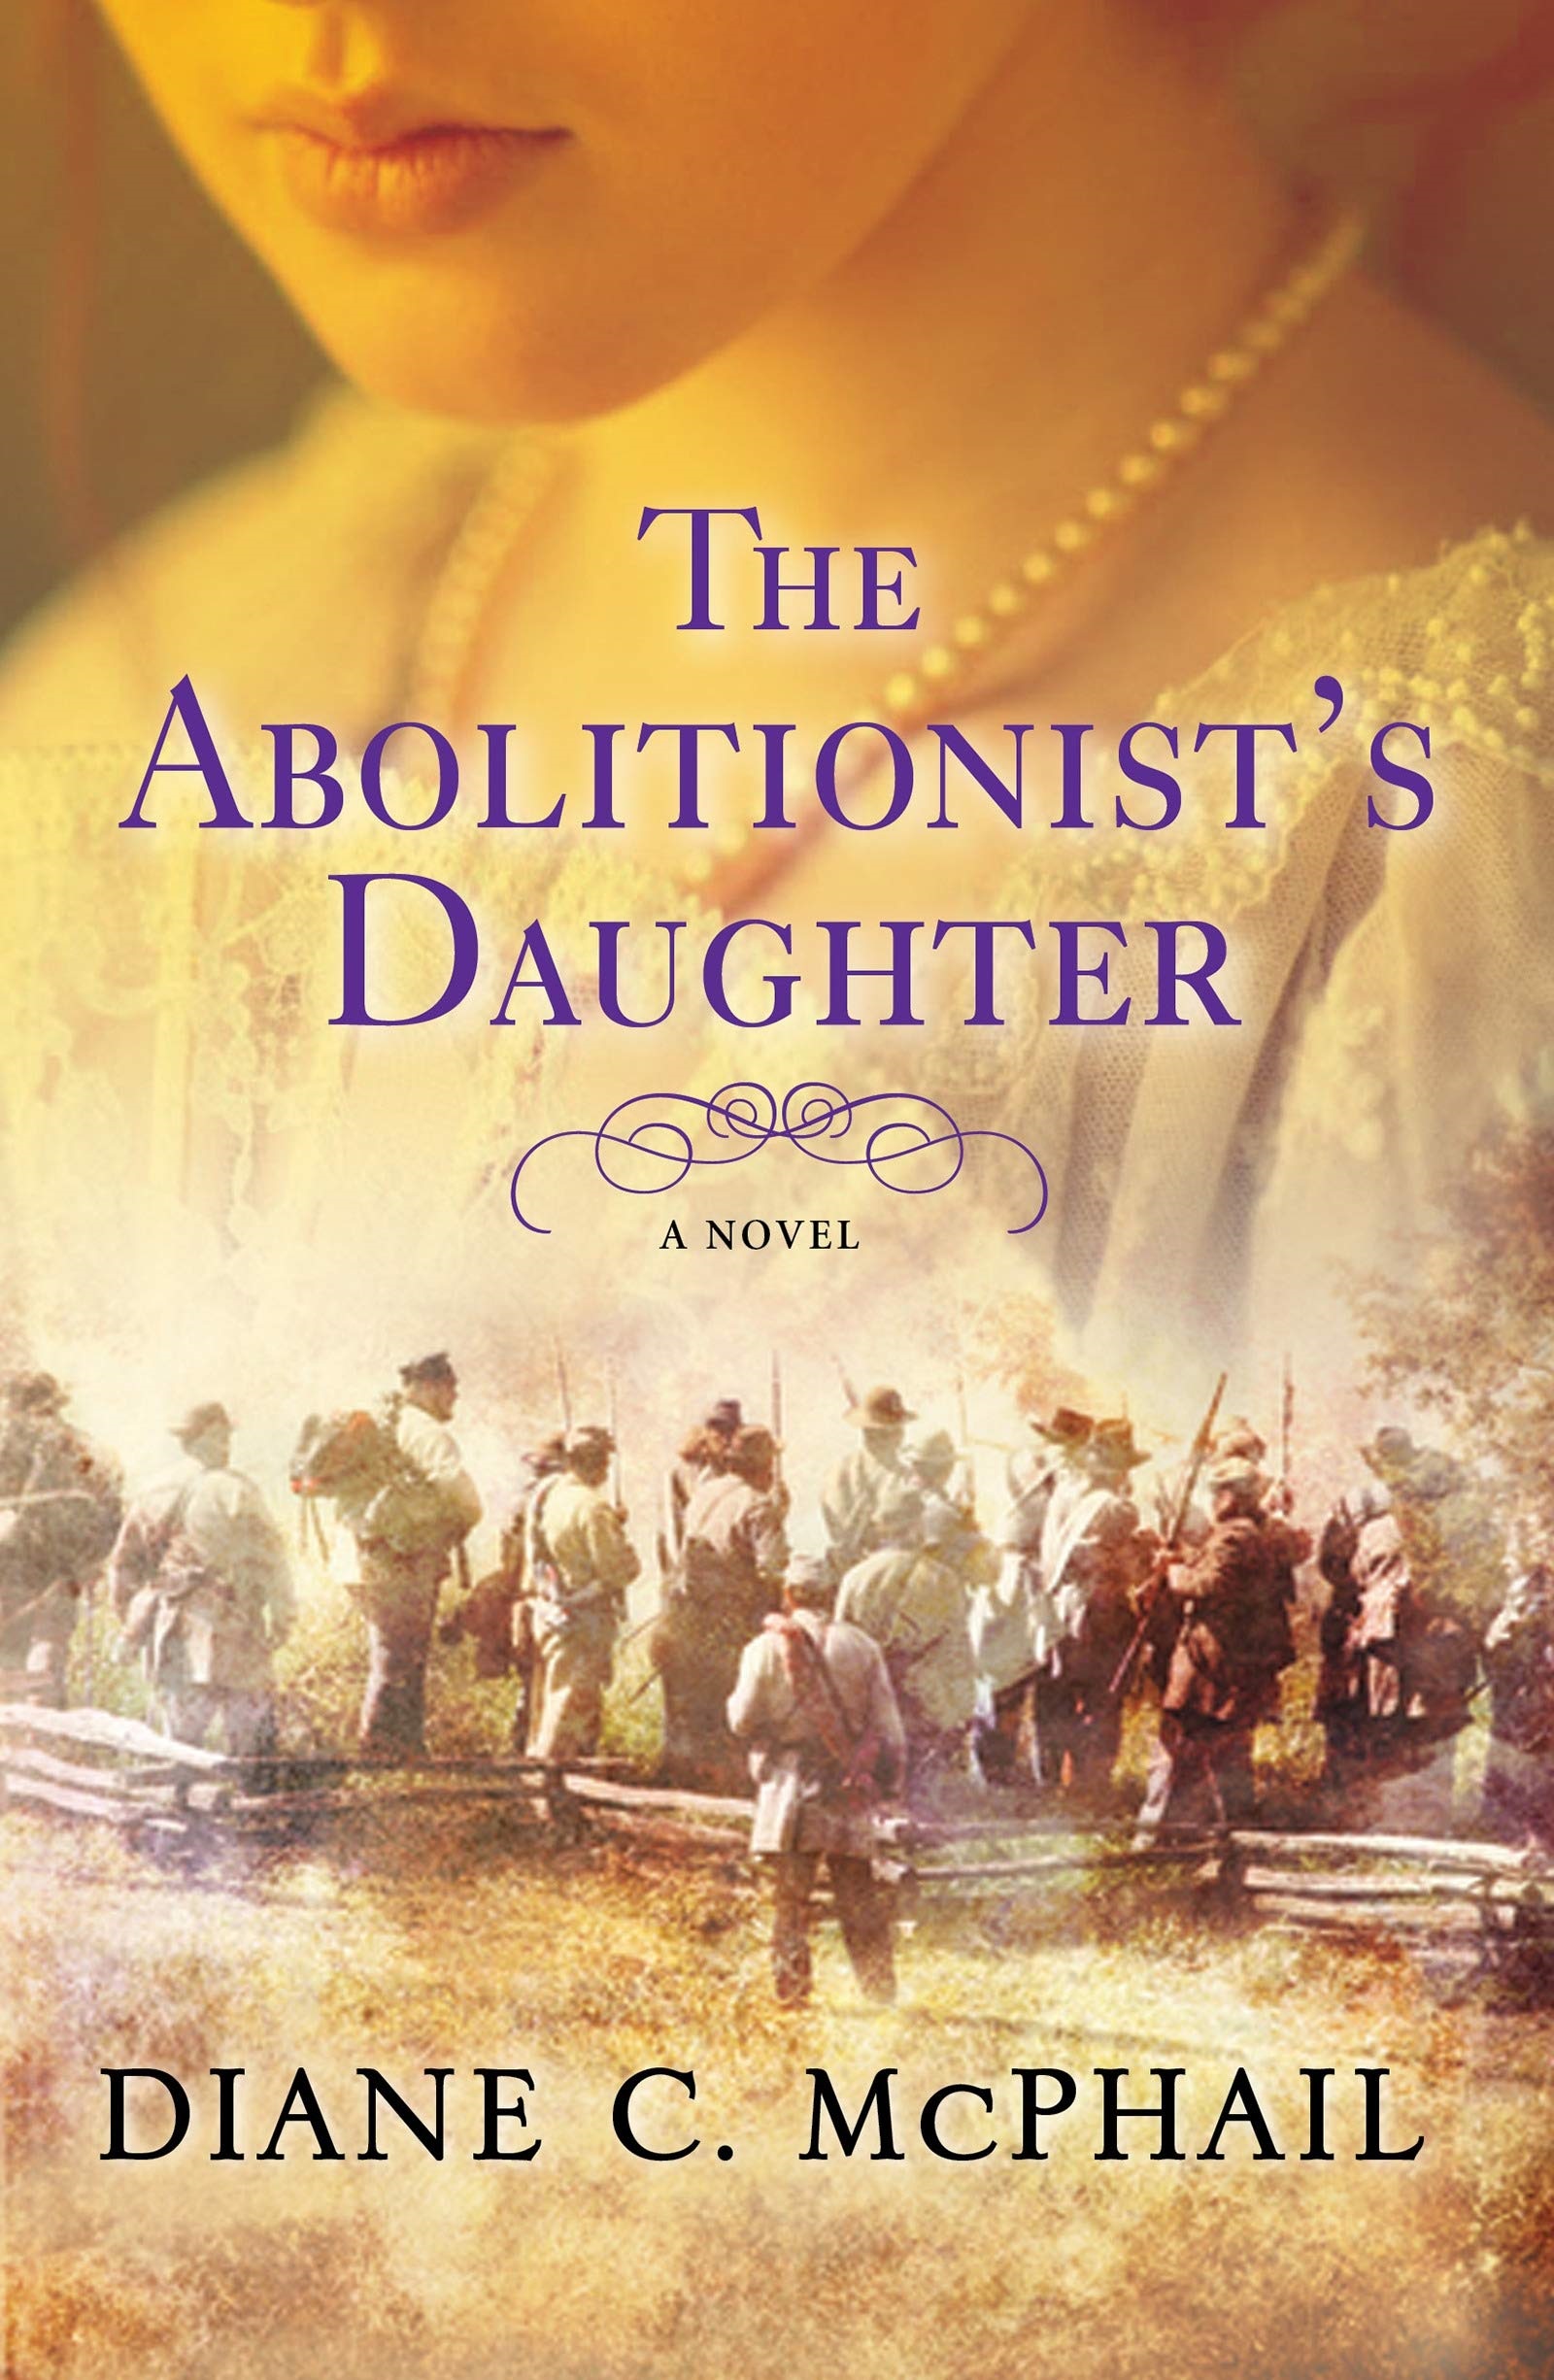 Book cover, The Abolitionist's Daughter by Diane C. McPhail.